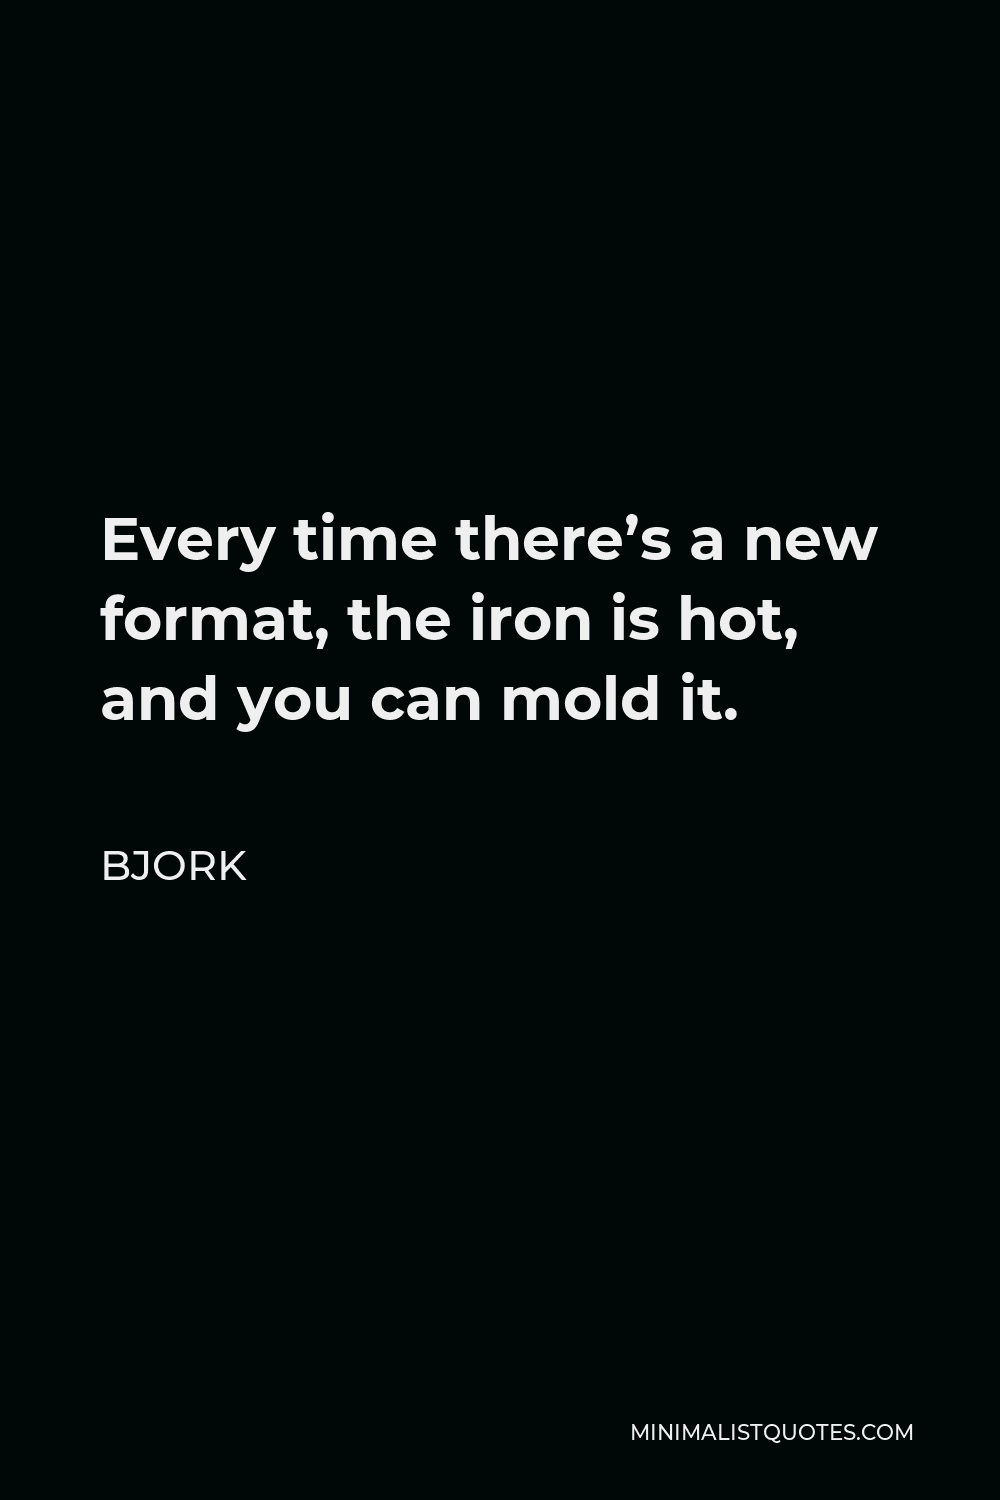 Bjork Quote - Every time there’s a new format, the iron is hot, and you can mold it.